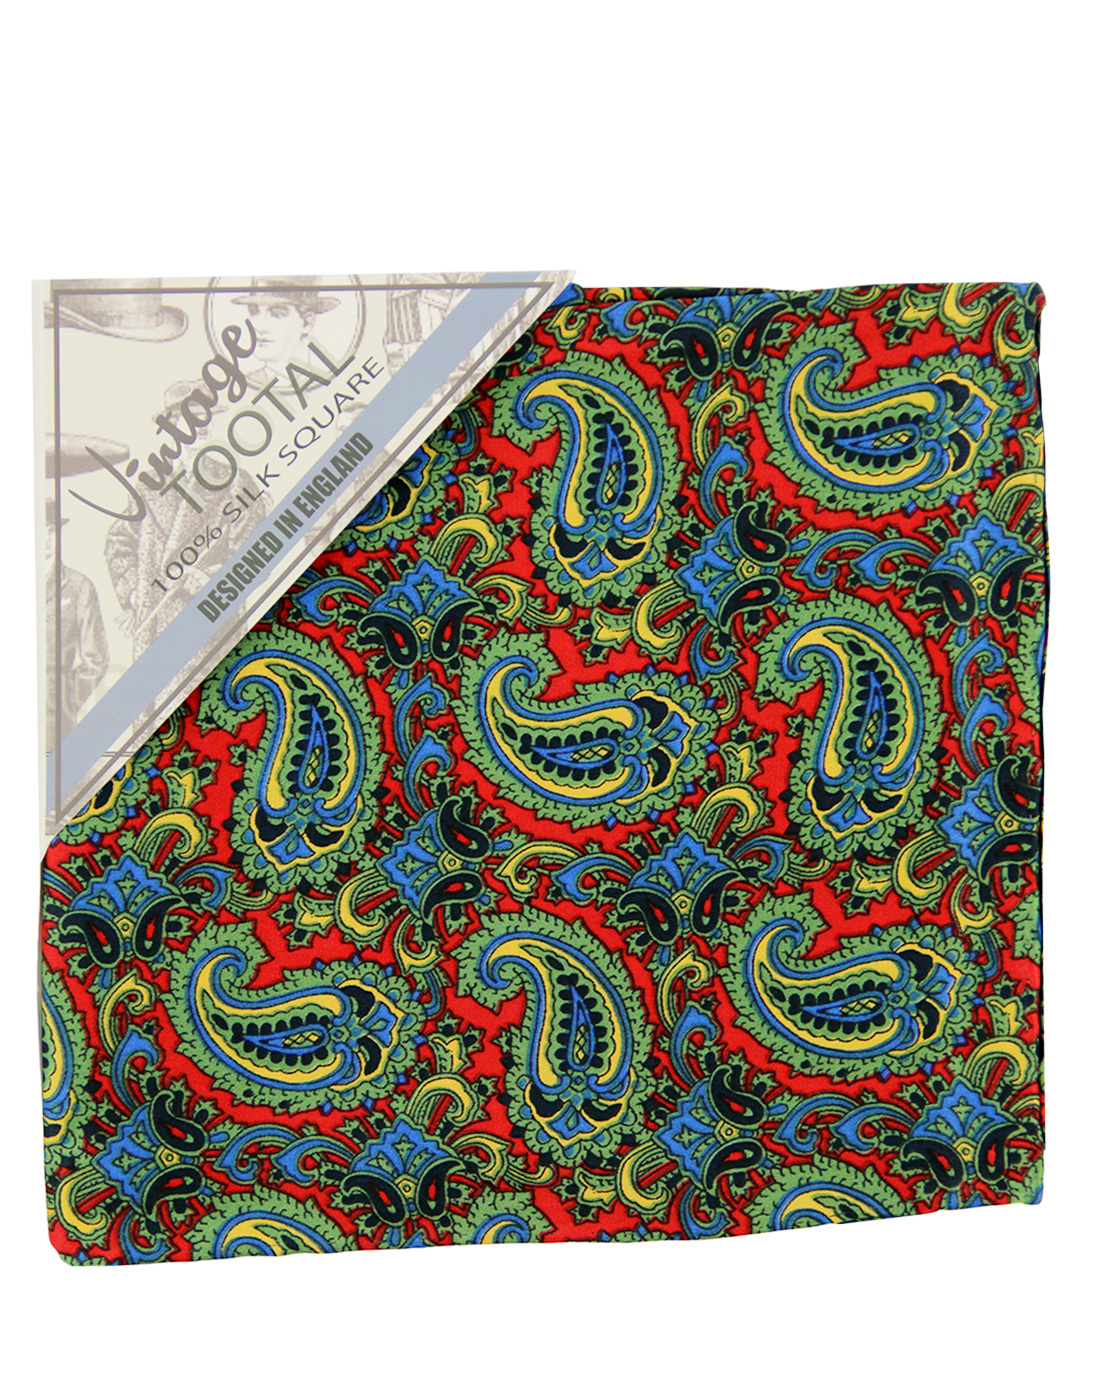 TOOTAL 1960s Mod Floral Paisley Silk Pocket Square